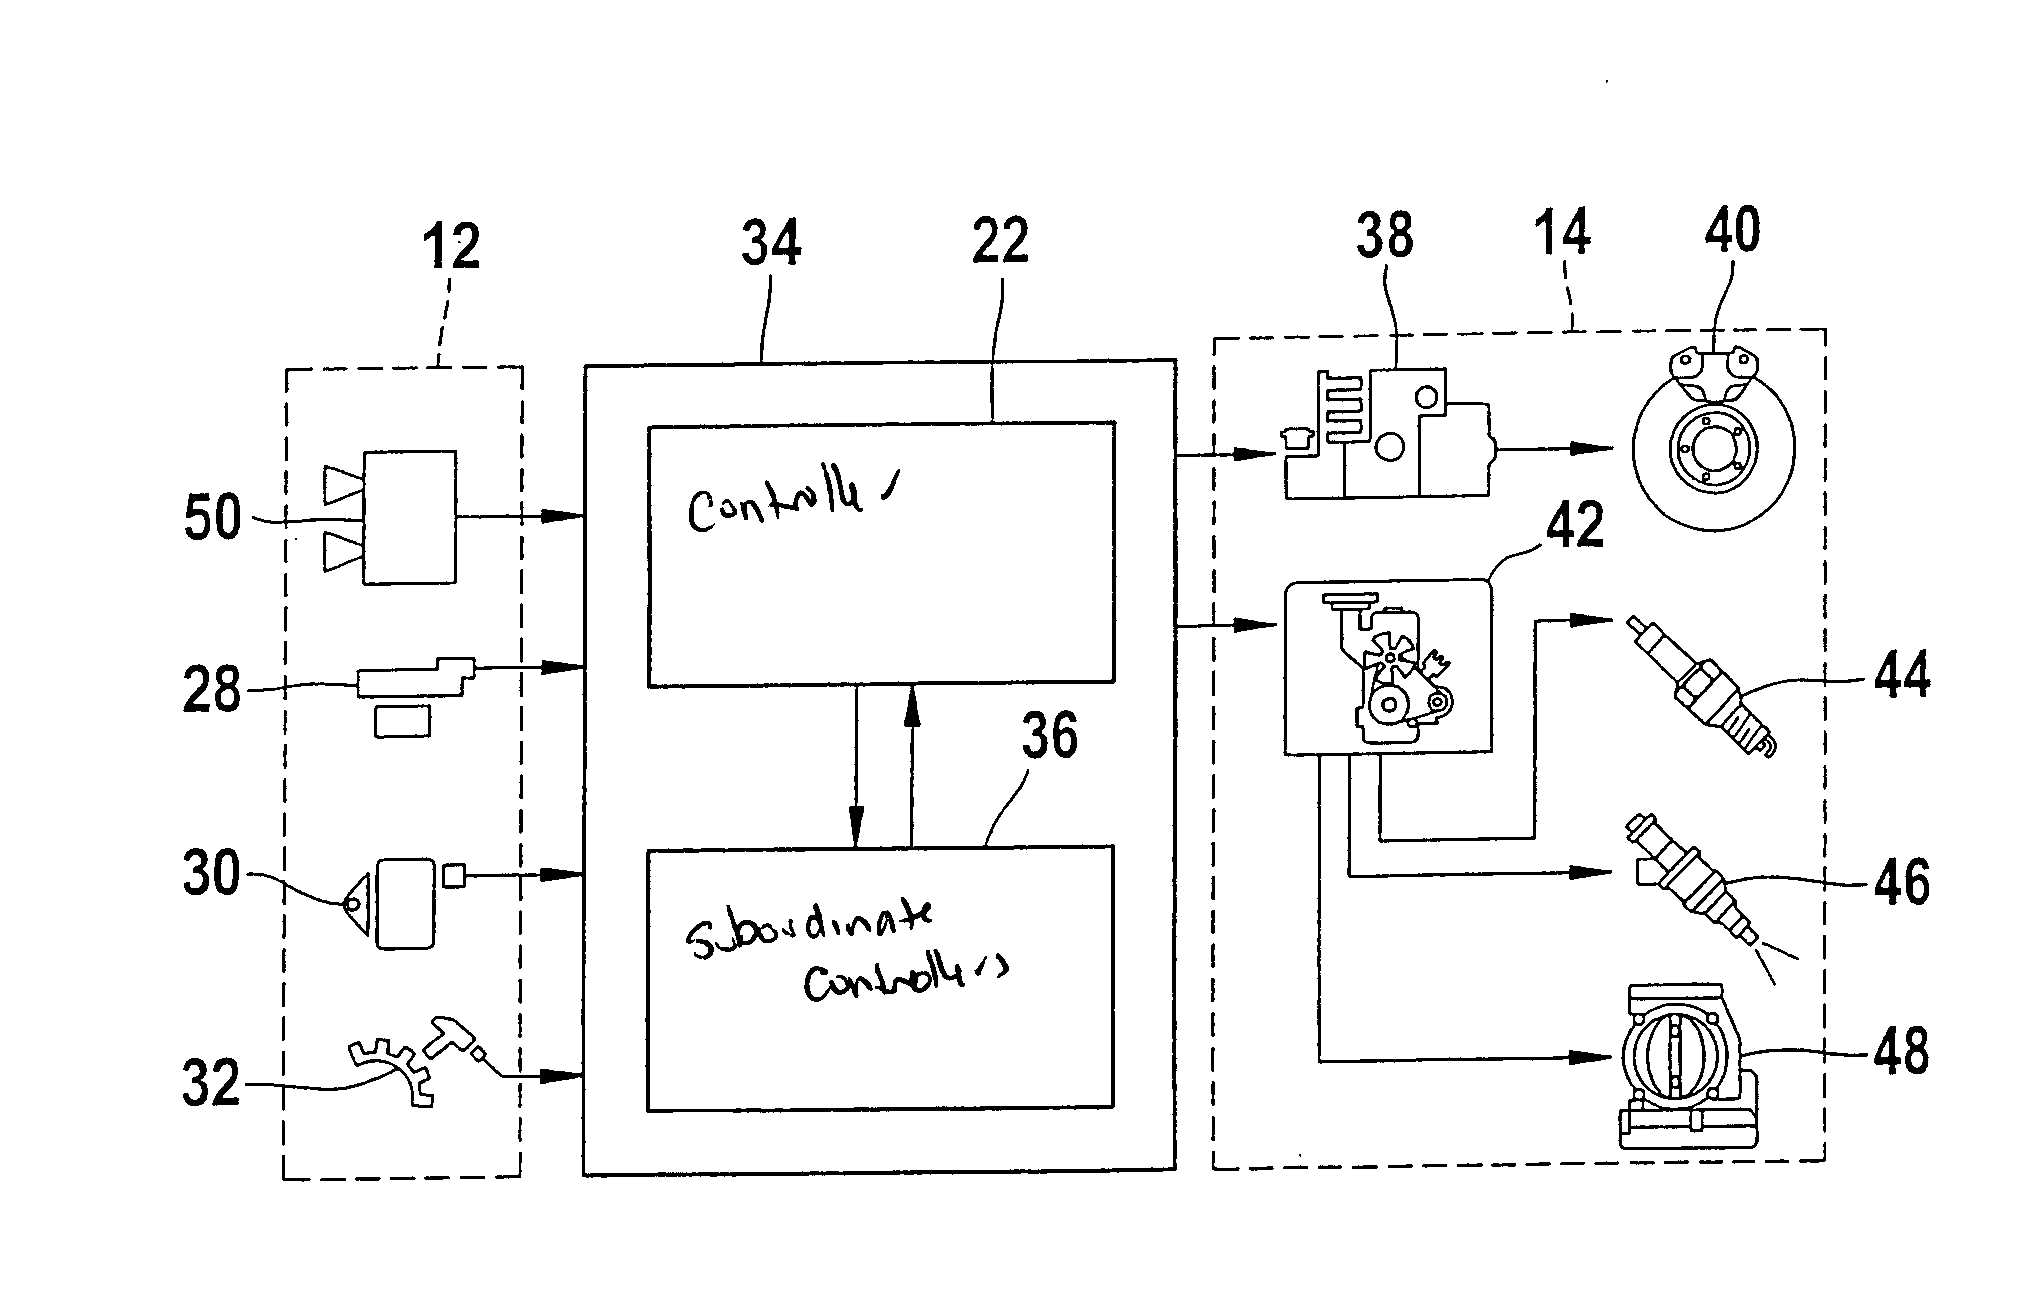 Controlling vehicle dynamics through the use of an image sensor system